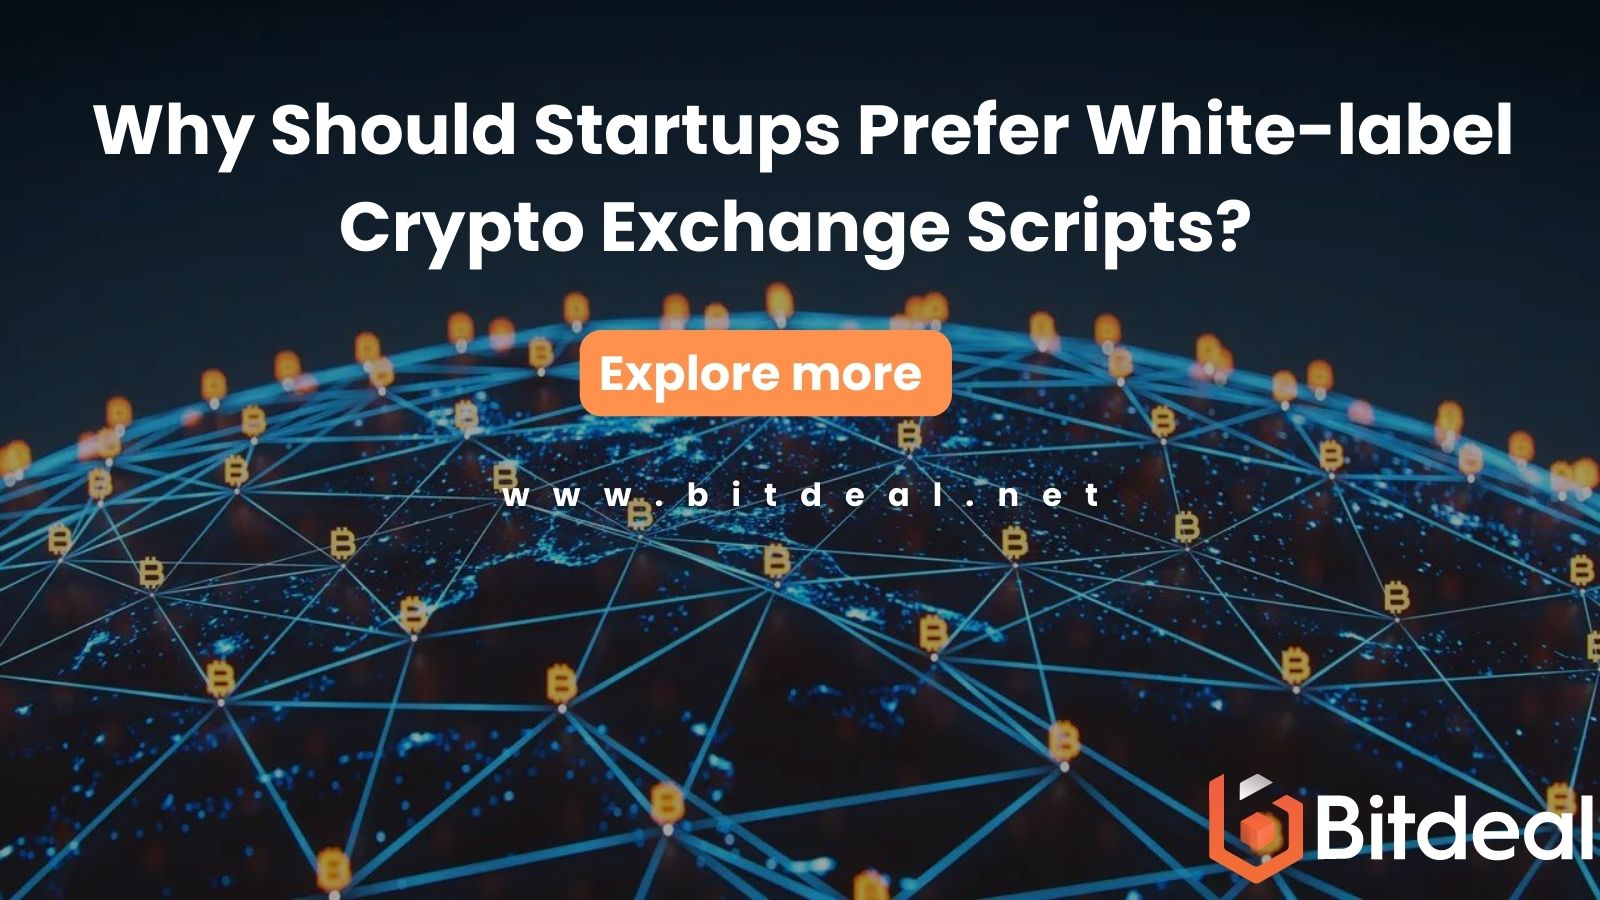 What Are The Main 3 Key Factors for Selecting a Best Crypto Exchange?